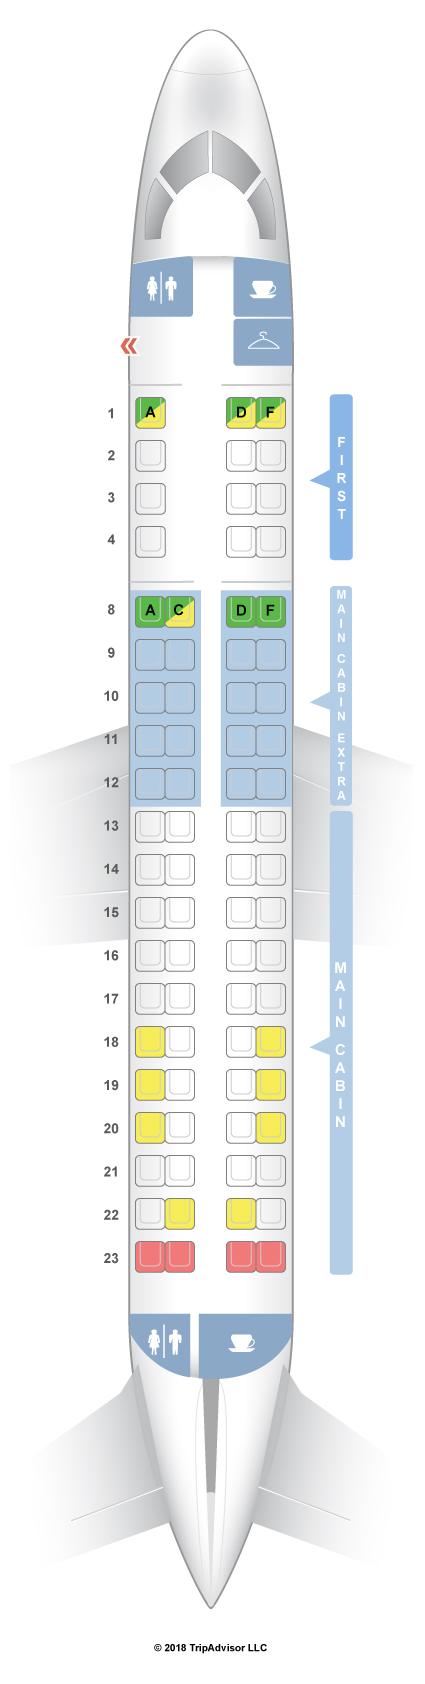 American Airlines Embraer Rj145 Seating Chart Trinity